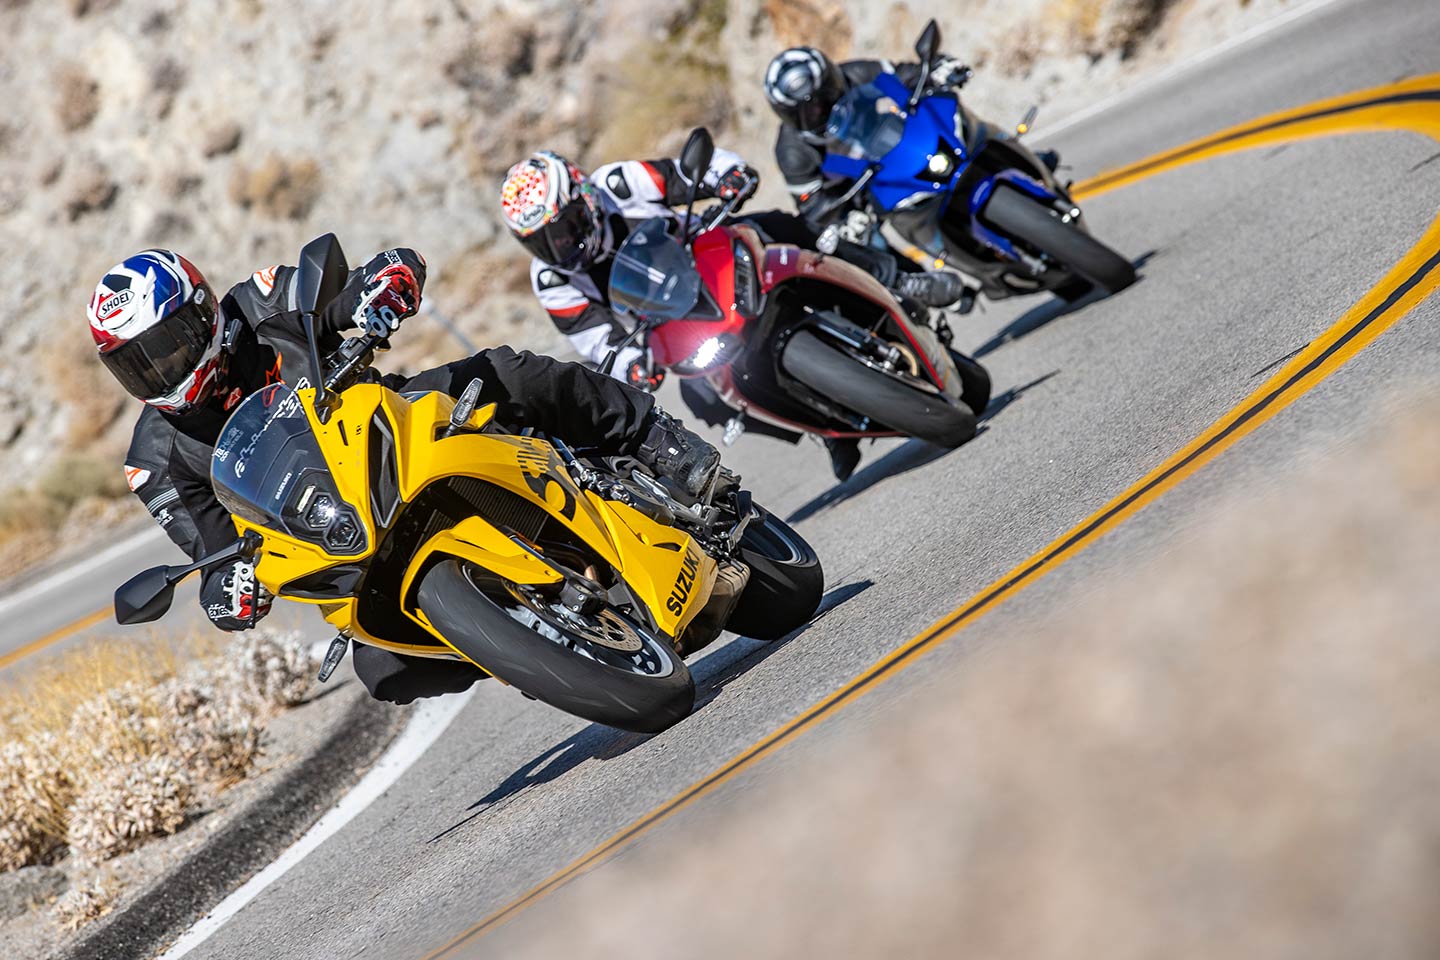 Sportbikes get that title for a reason, so they must prove their chops out on twisty roads.